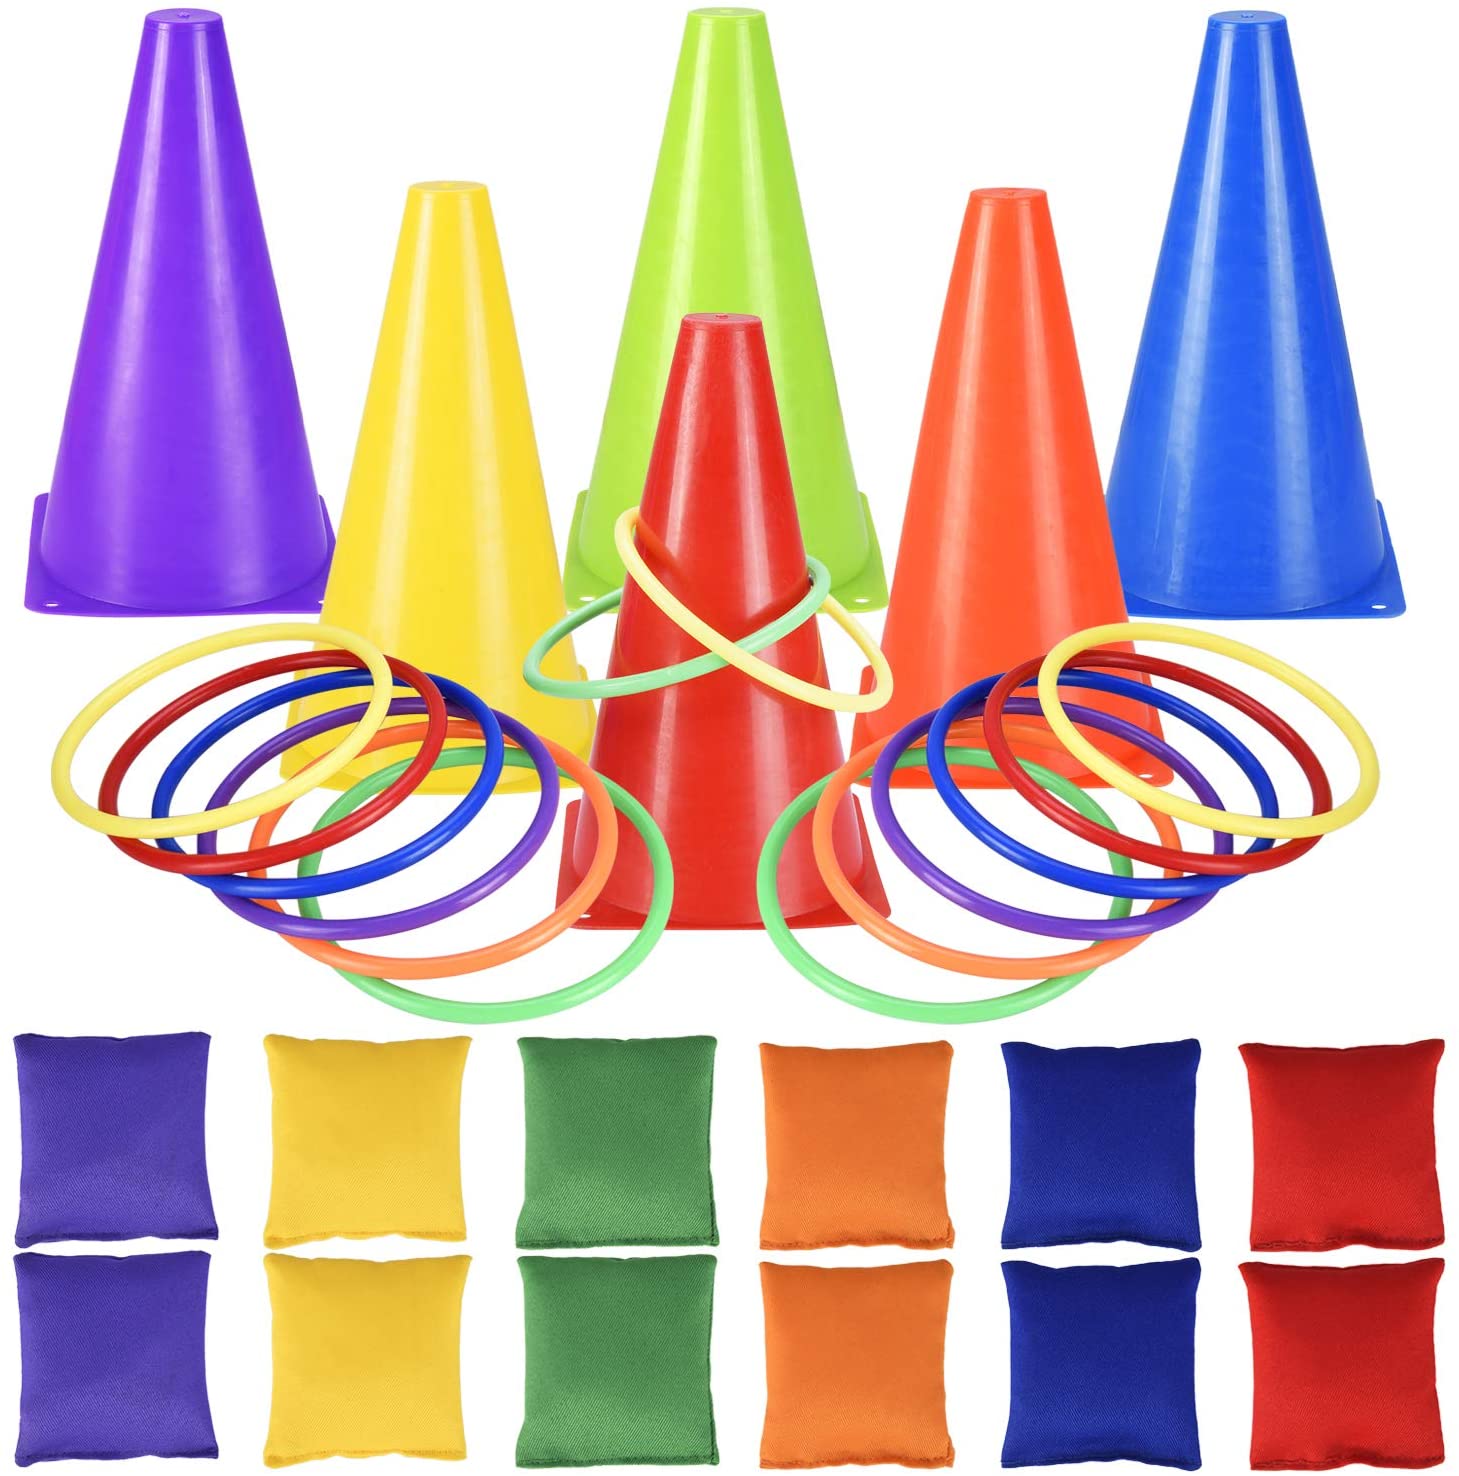 life's-a-circus-enjoy-the-party-ring-toss-game